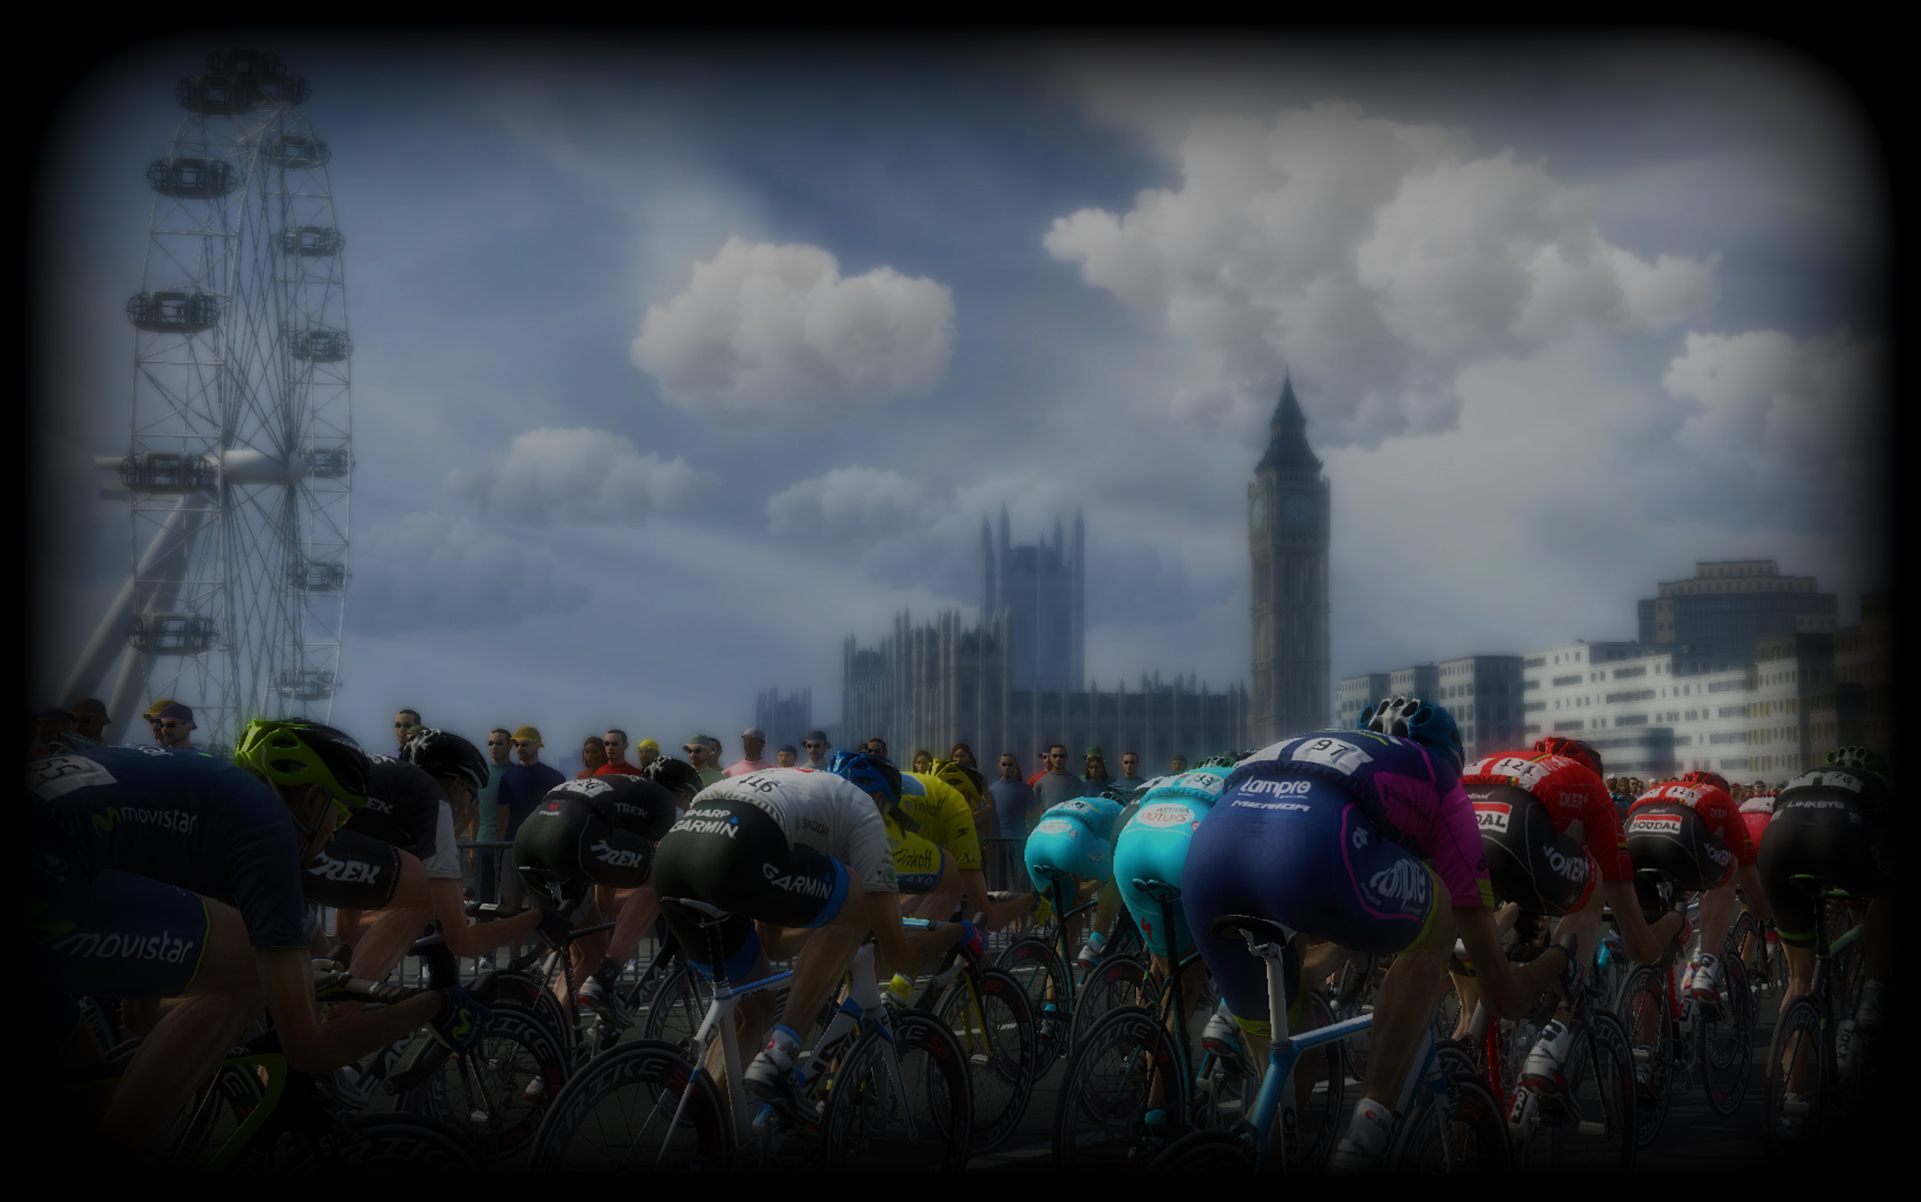 Video Game Pro Cycling Manager 2014 Wallpaper